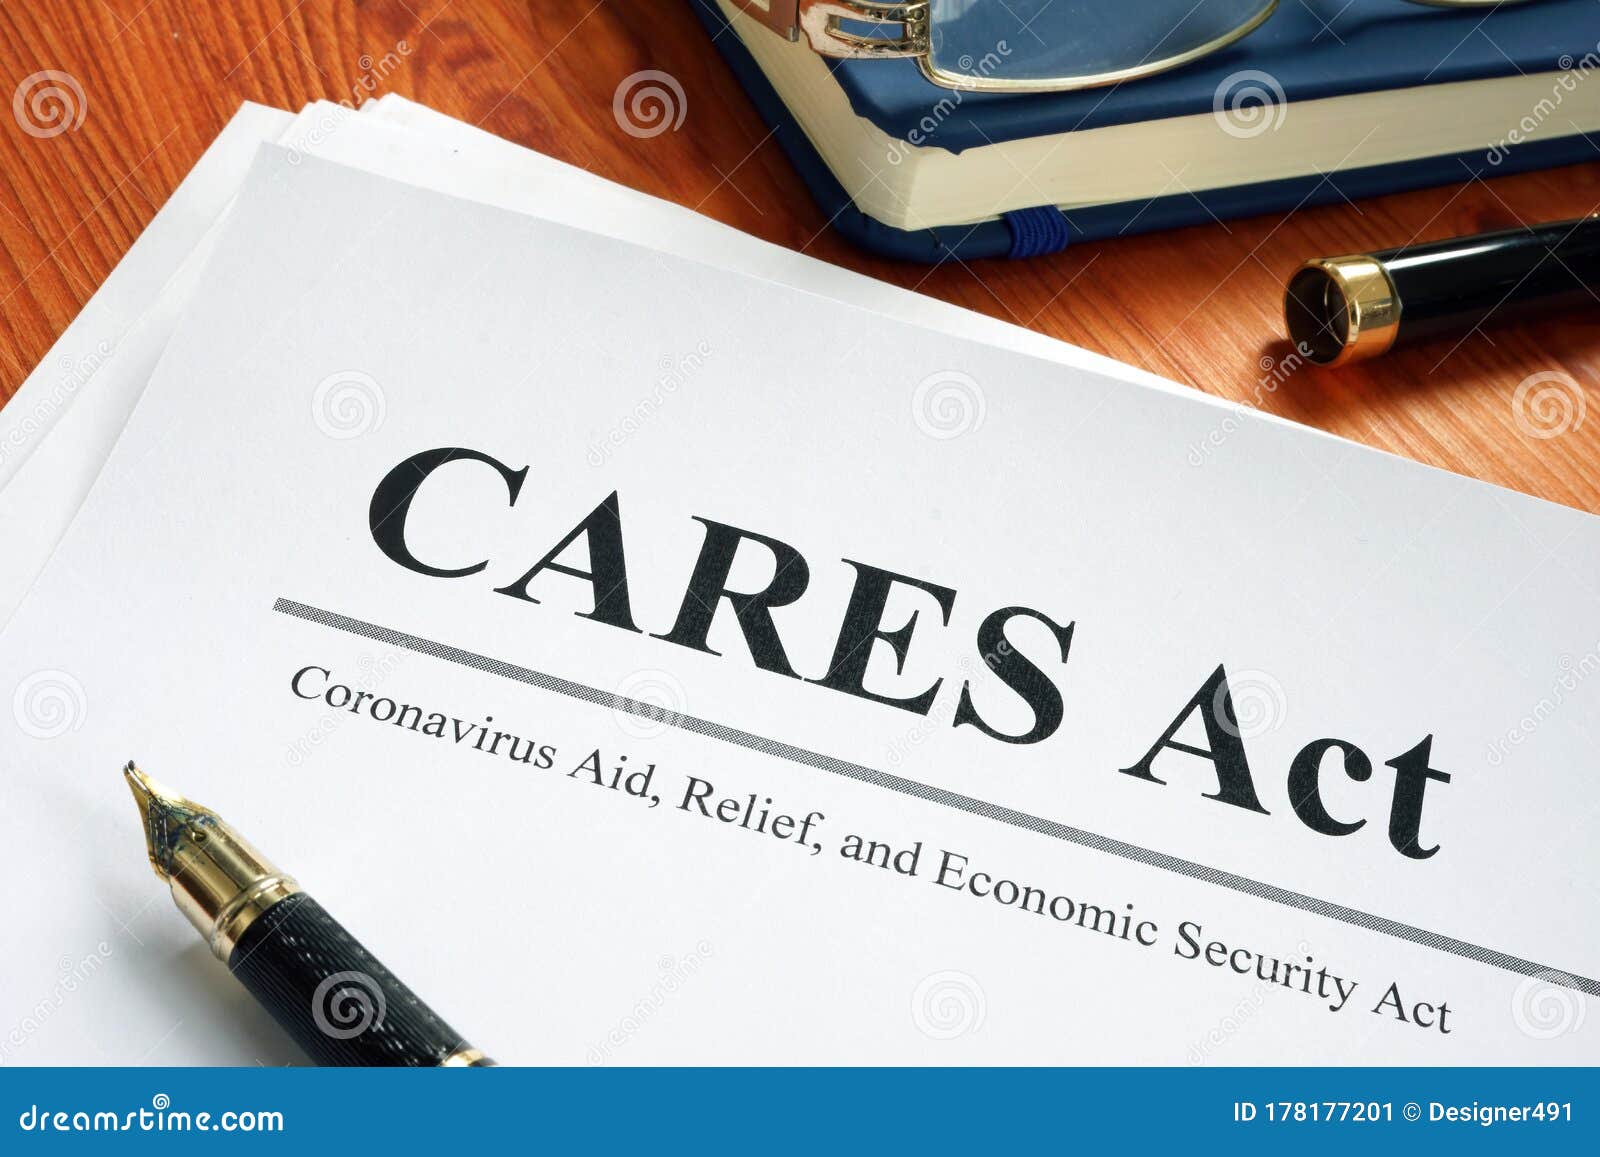 coronavirus aid, relief, and economic security cares act on the desk